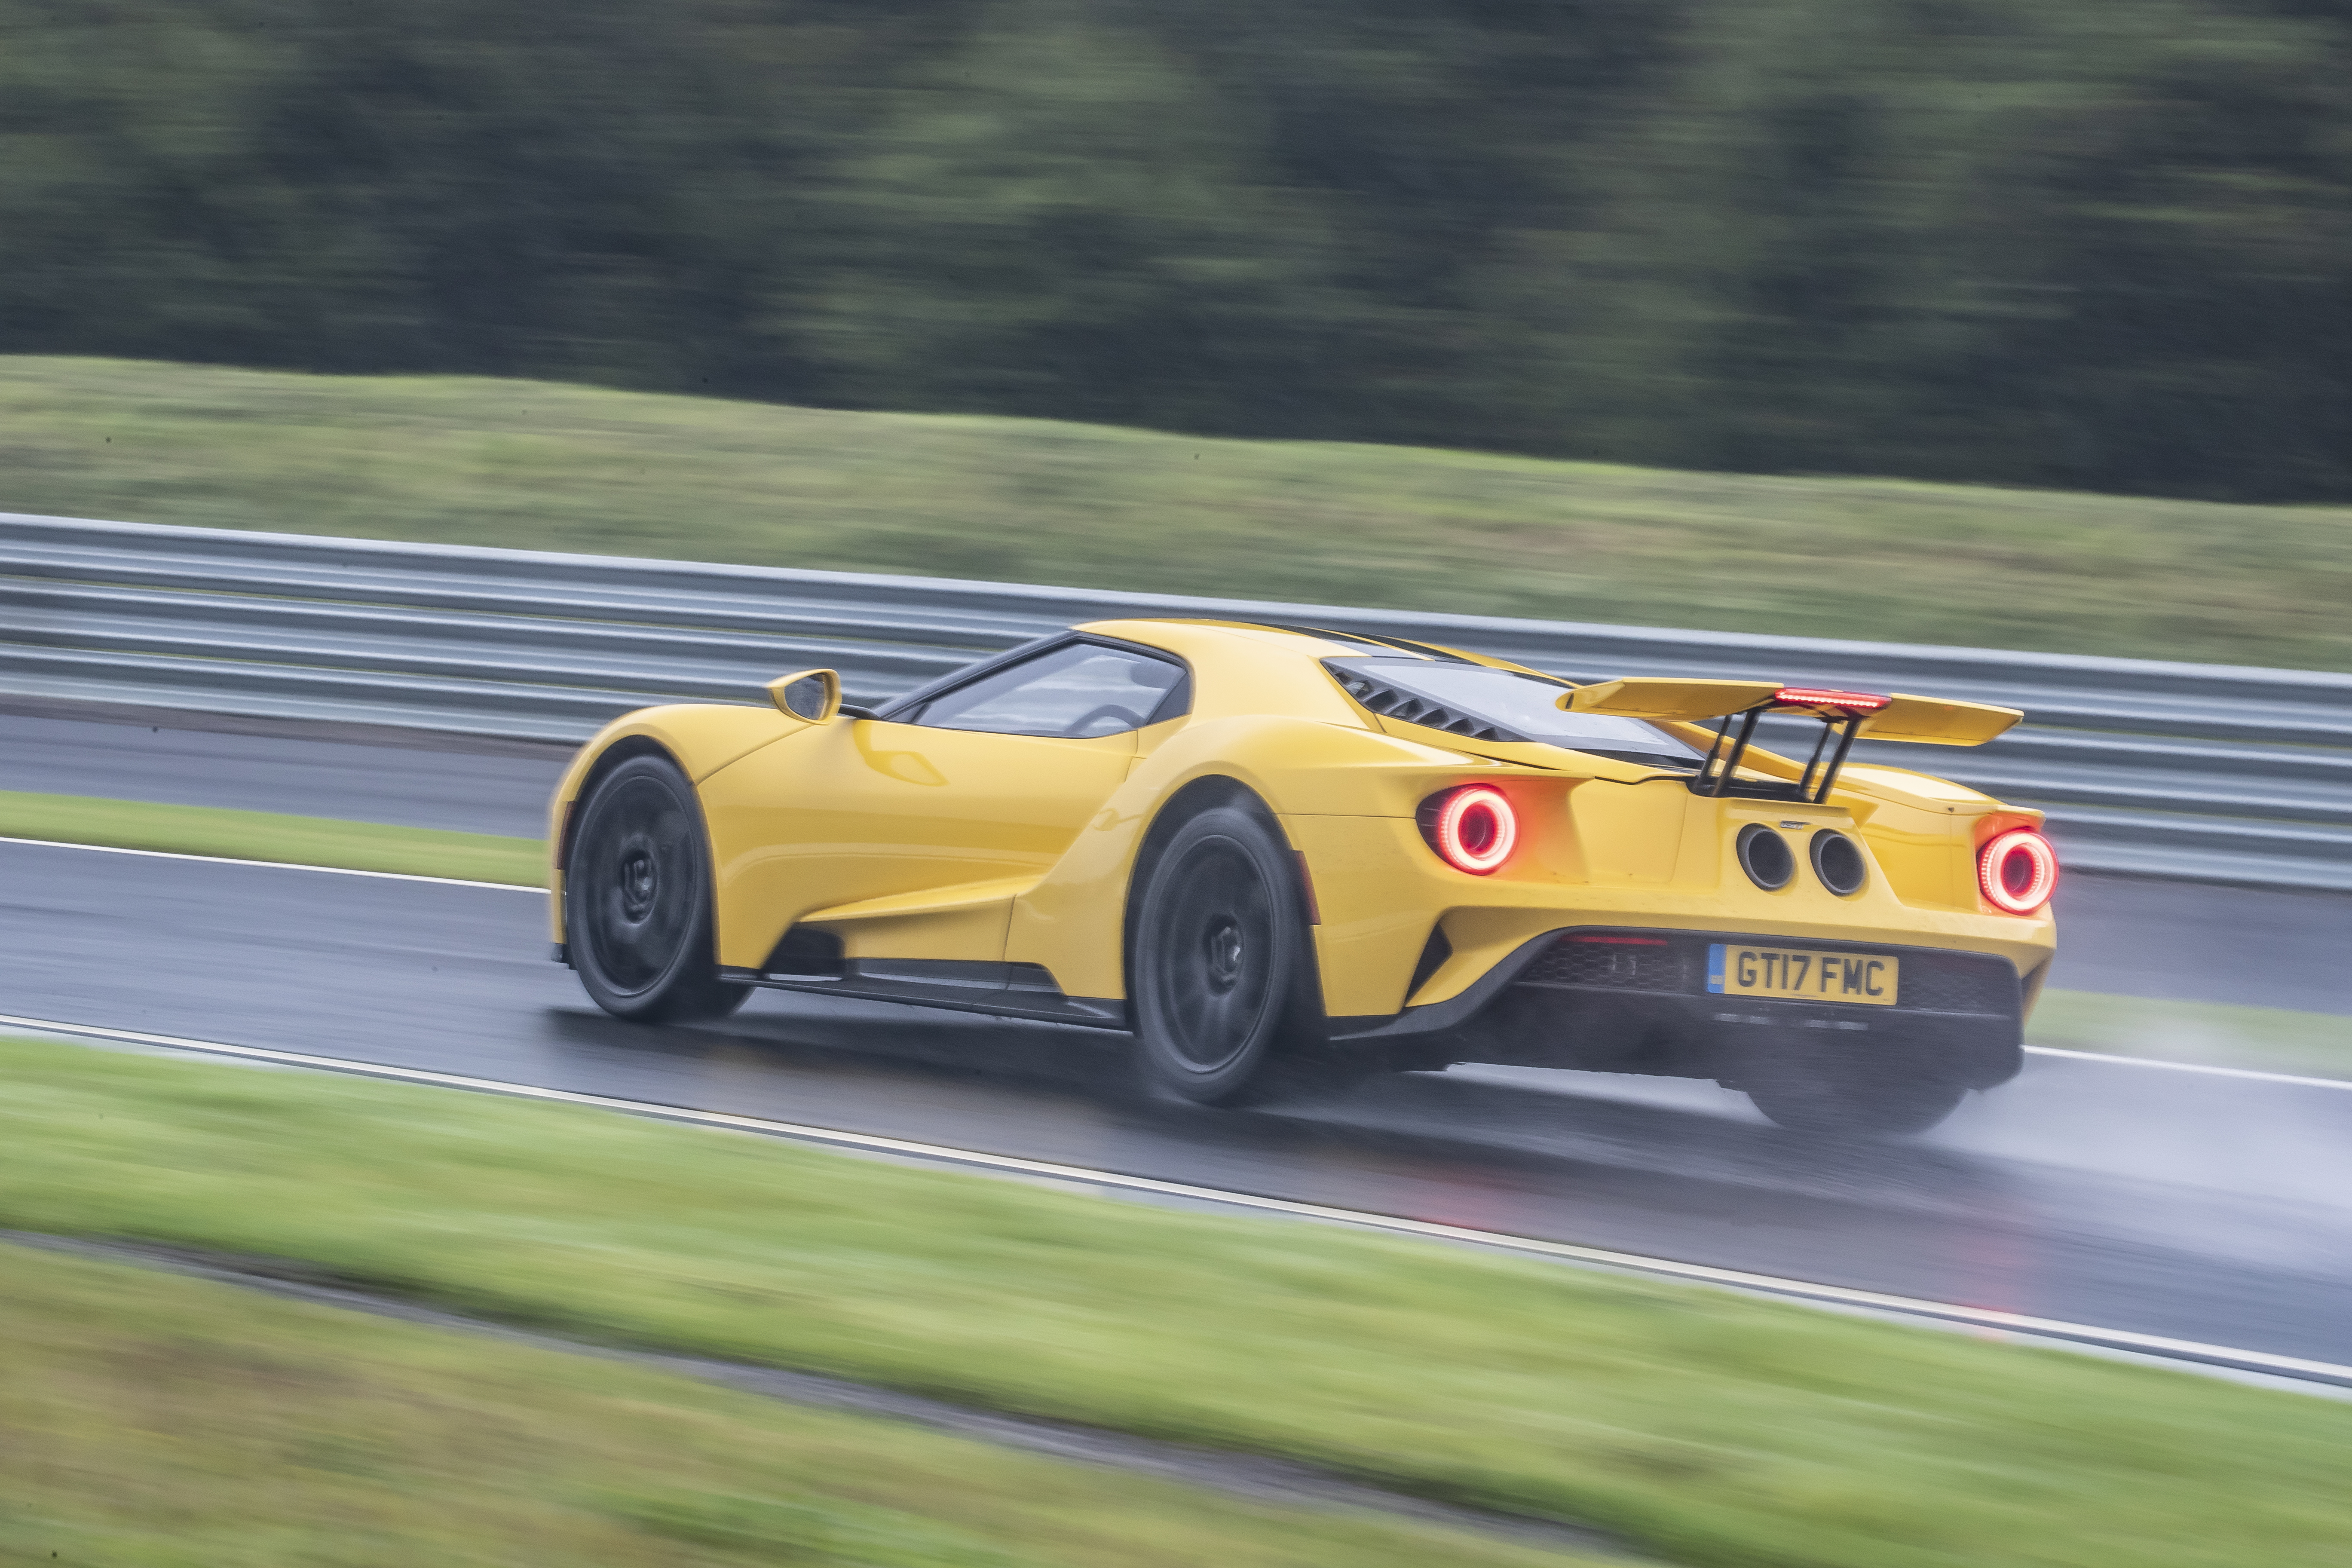 Despite tricky conditions, the GT remained manageable